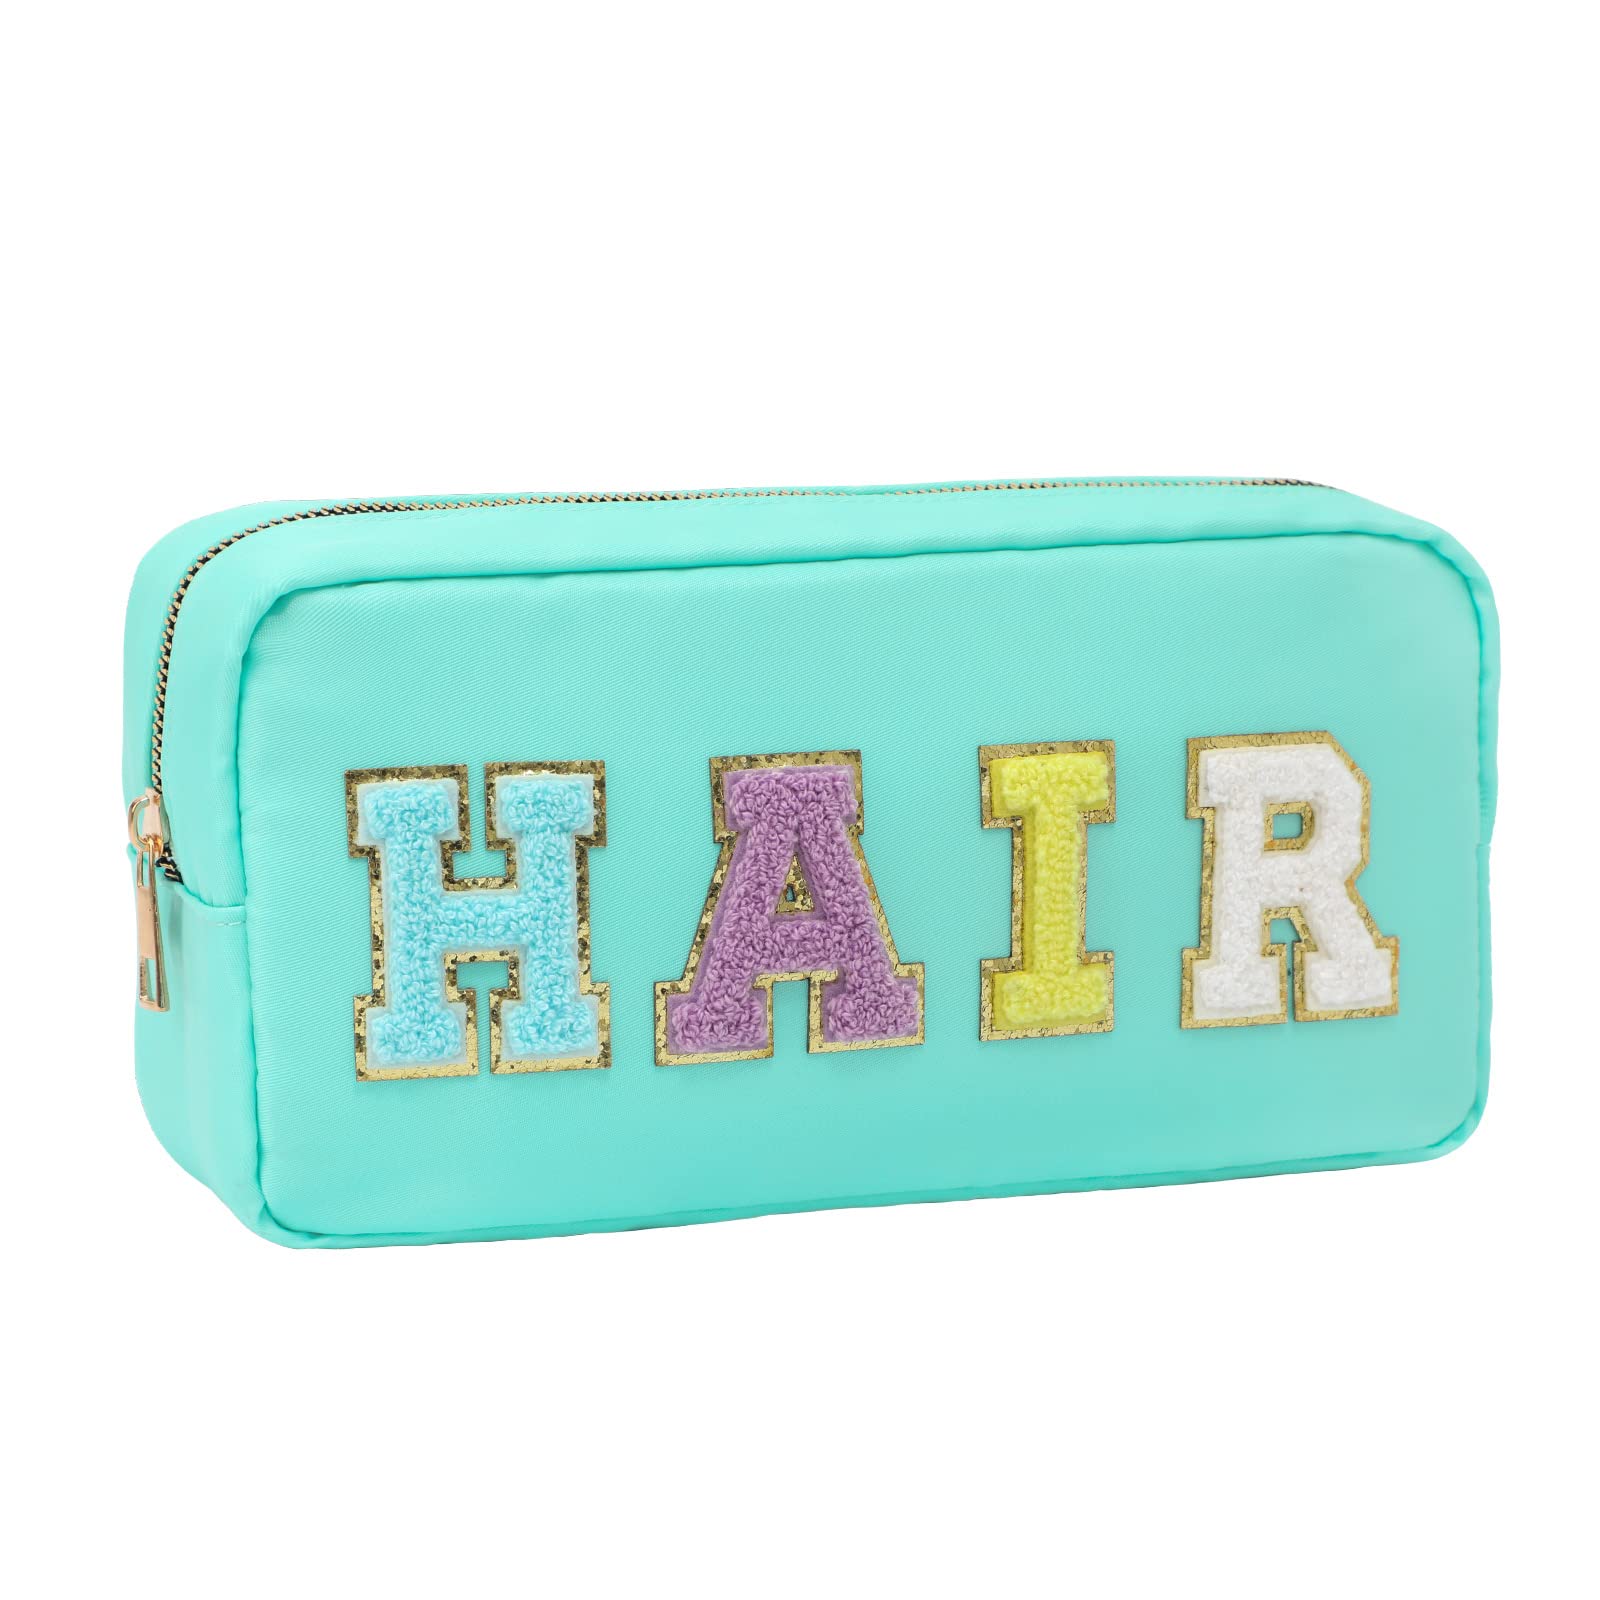 DYSHAYEN Nylon Cosmetic Bag Preppy Hair Makeup Bag for Women Girls Travel Toiletry Organizer with Chenille Letter Patches (Mint-HAIR)